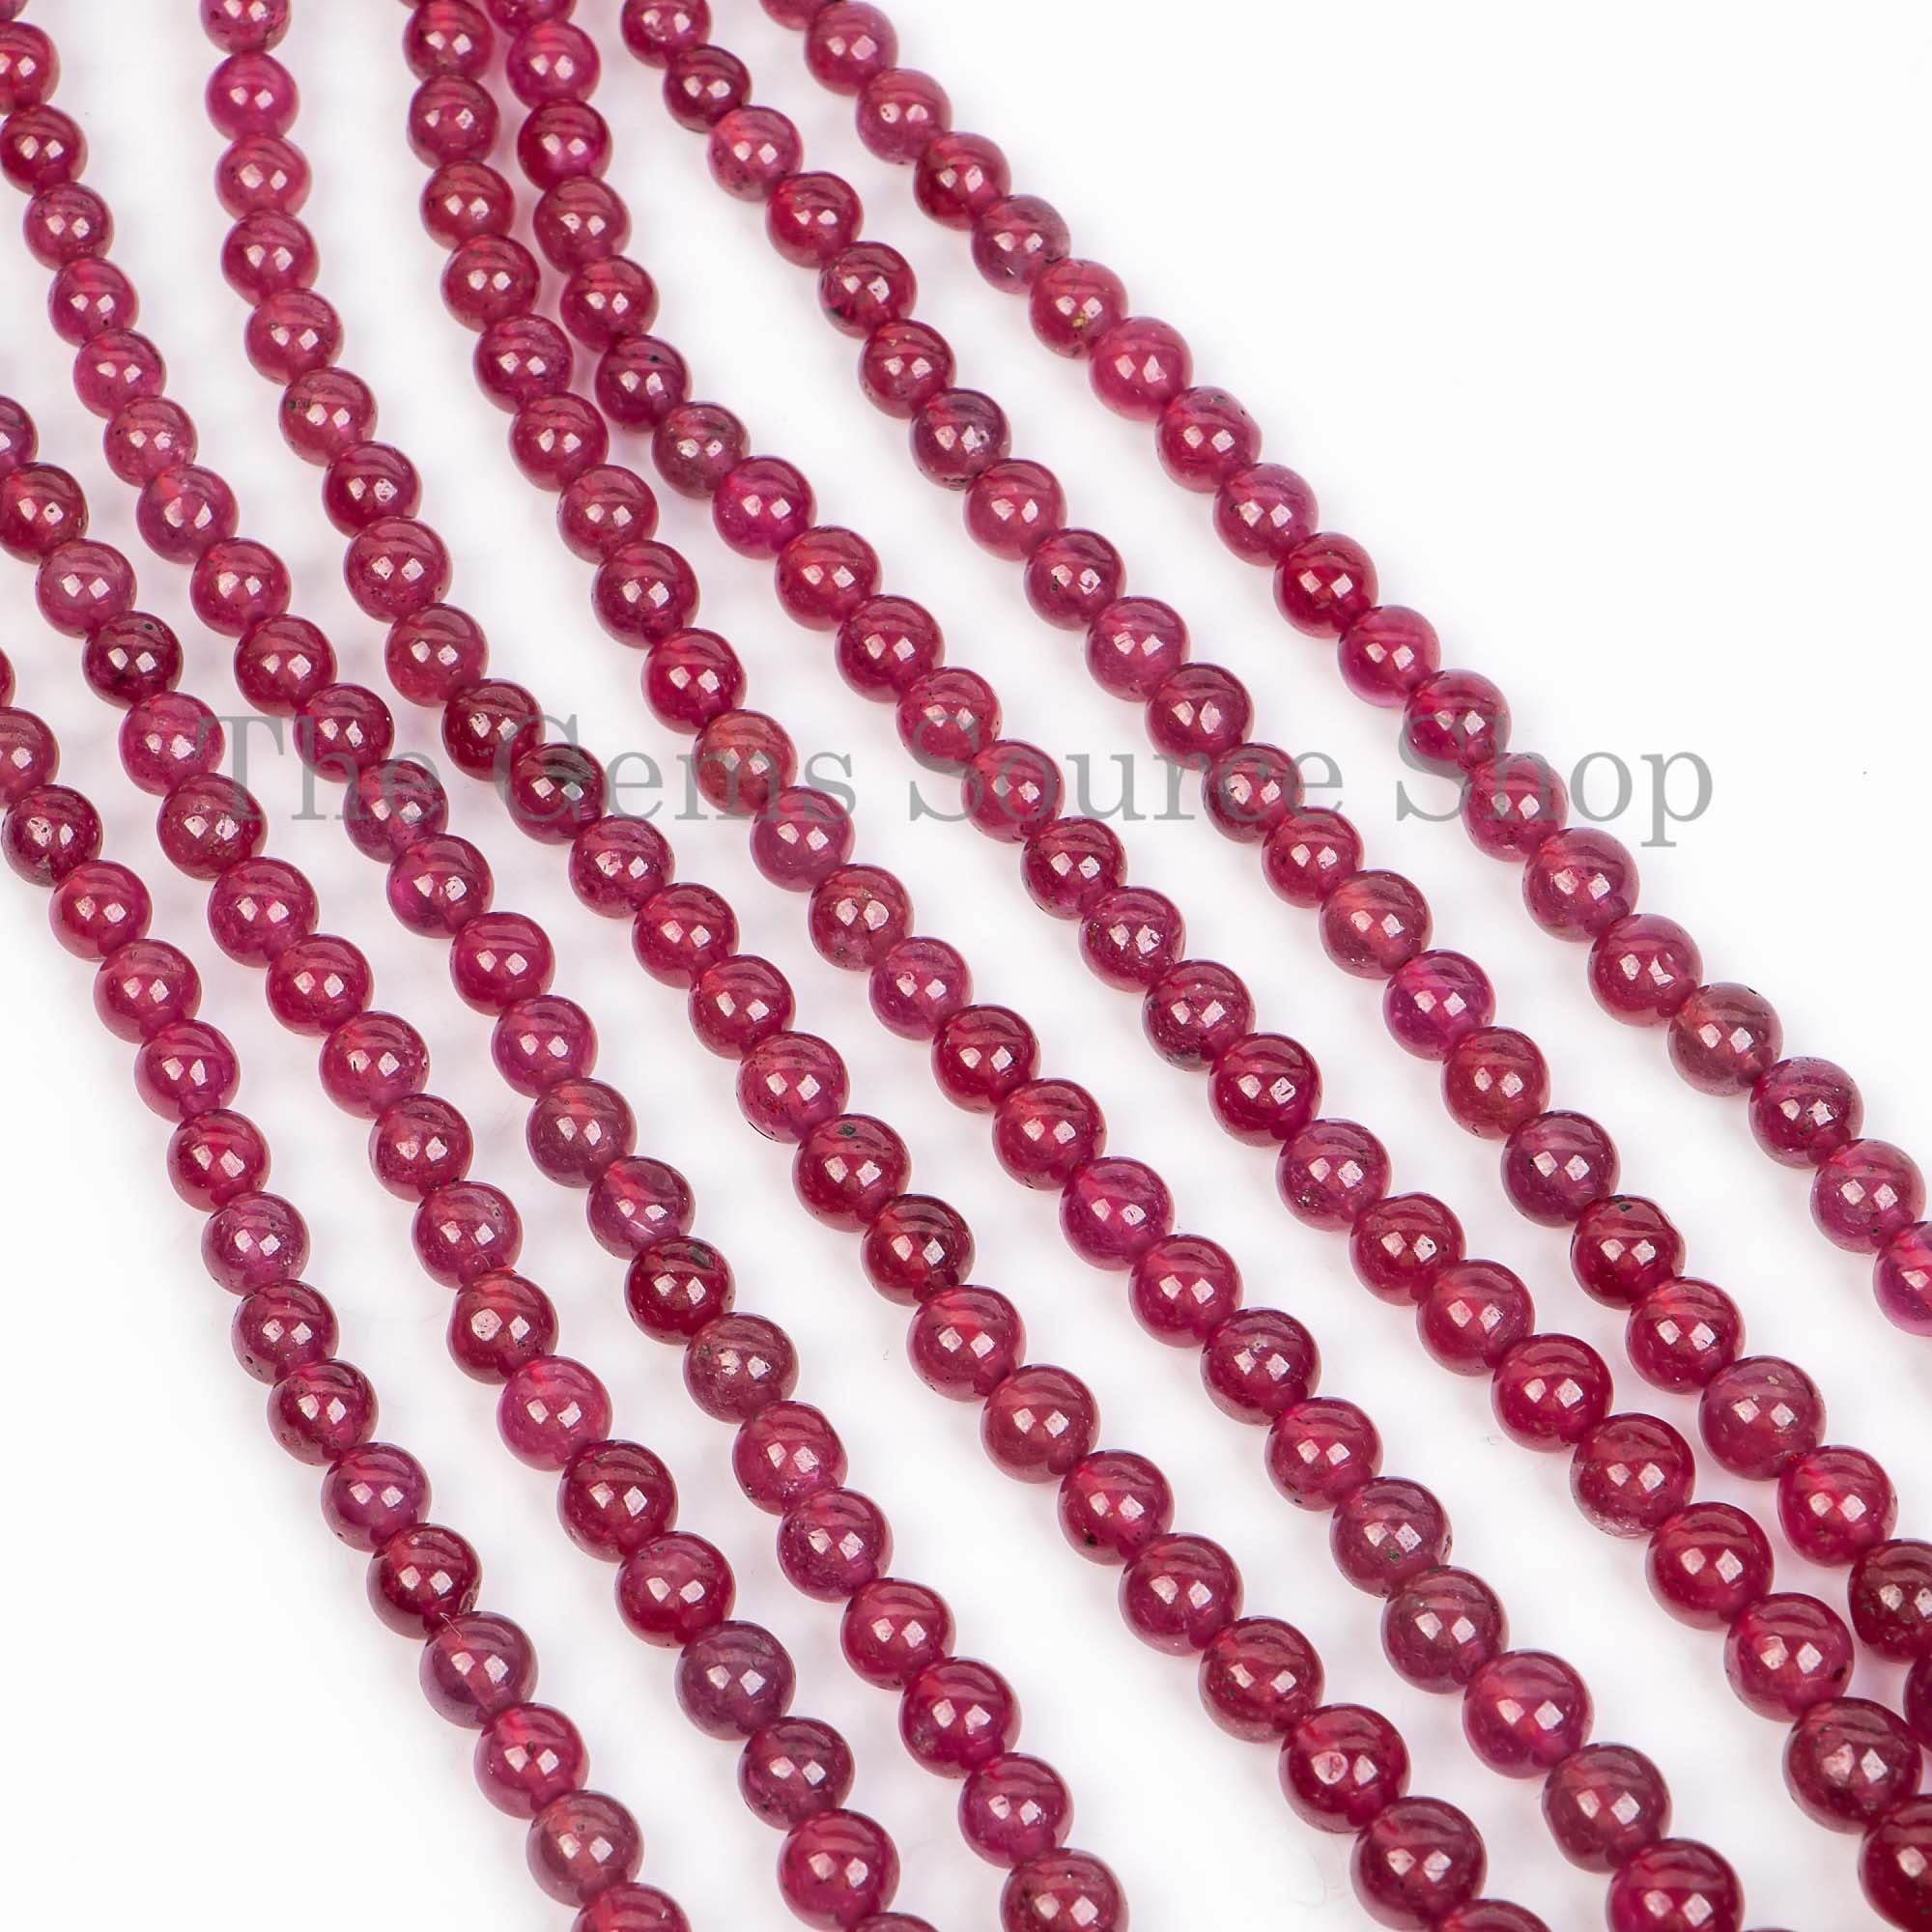 Natural Ruby Smooth Round Shape Beads, Plain Ruby Gemstone Beads, Wholesale Beads